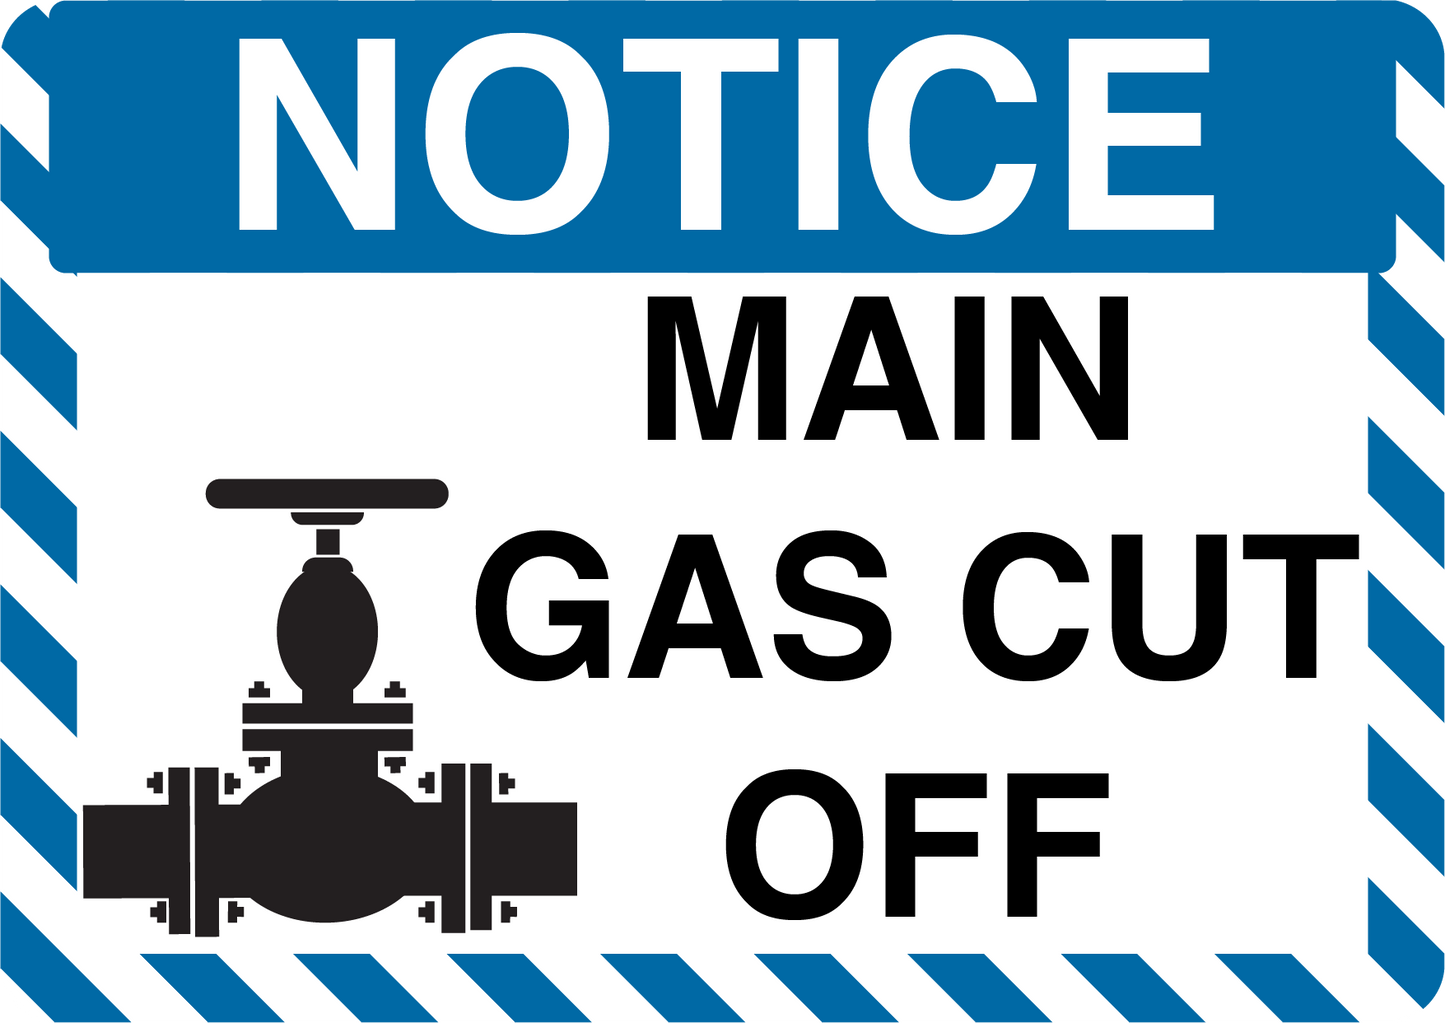 Notice "Main Gas Cut Off" Durable Matte Laminated Vinyl Floor Sign- Various Sizes Available